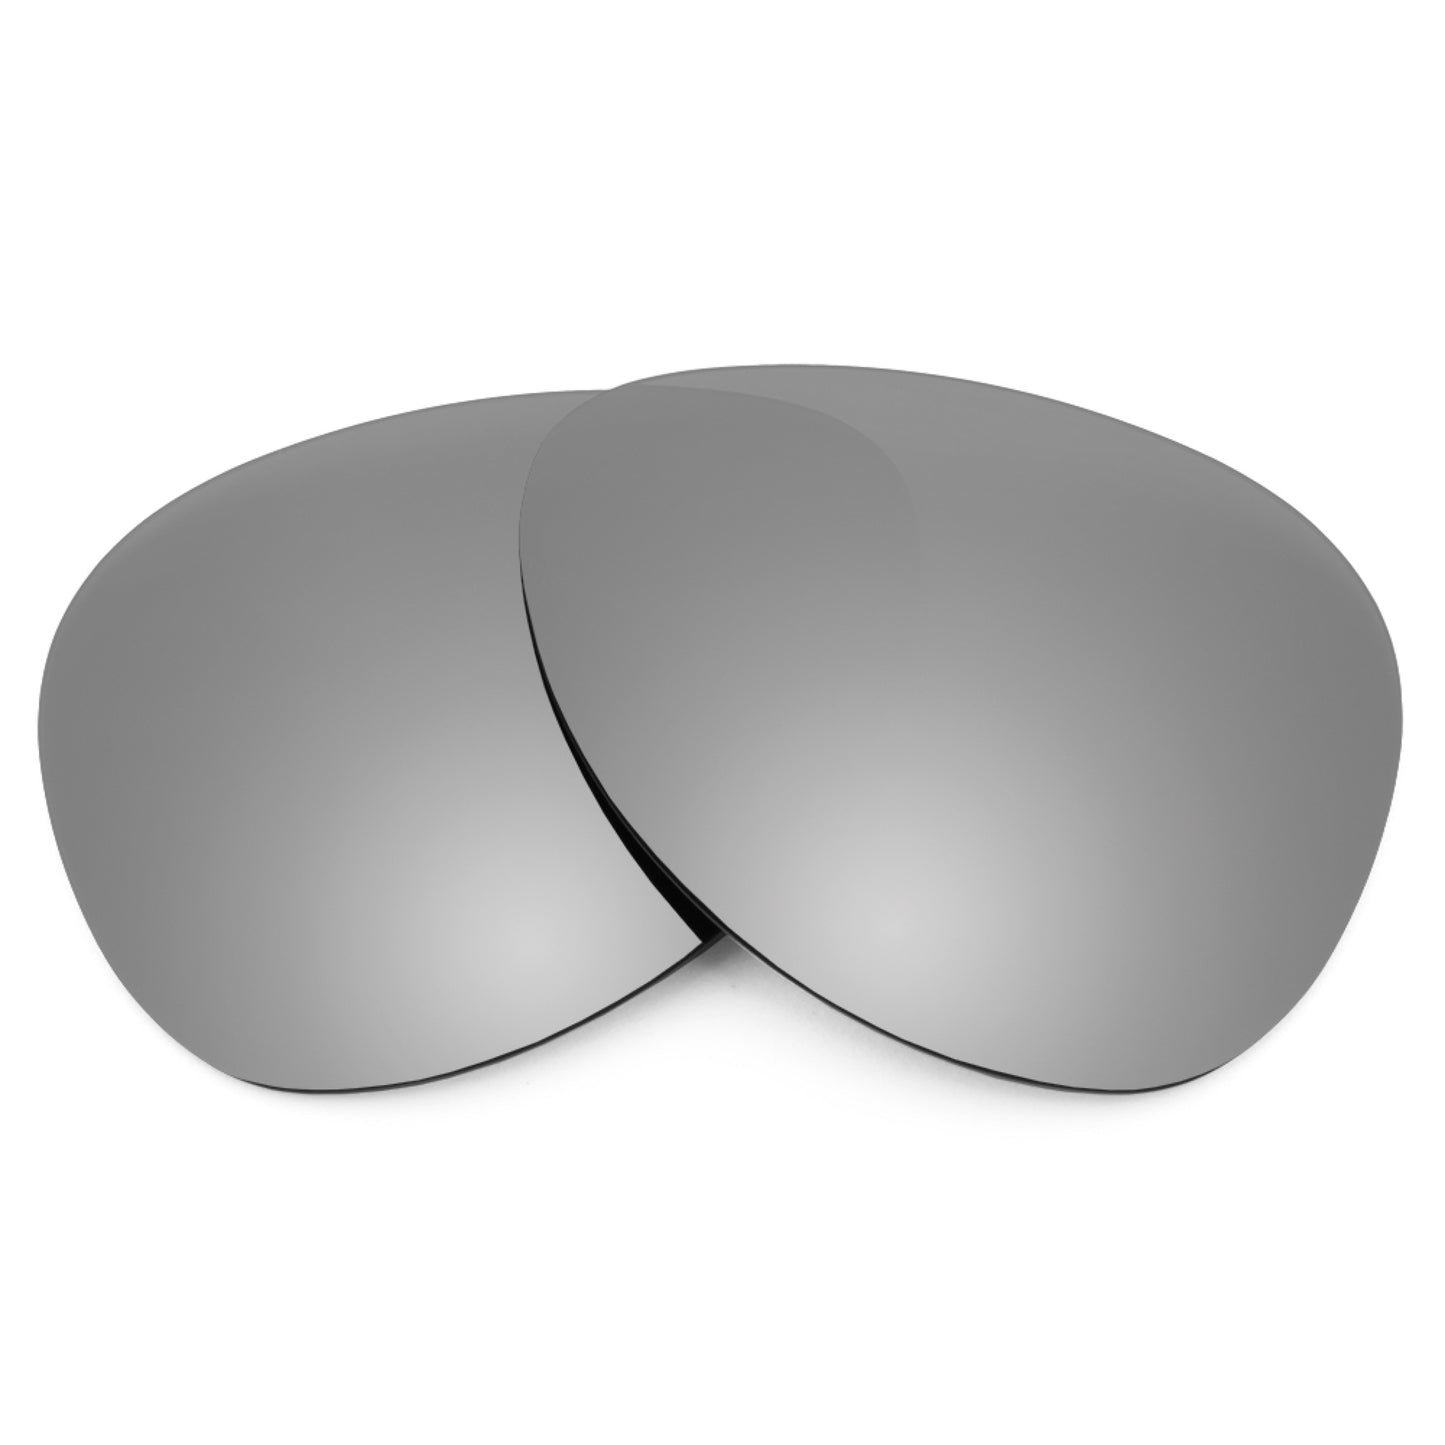 Revant replacement lenses for Ray-Ban Cats 1000 RB4126 57mm Elite Polarized Titanium